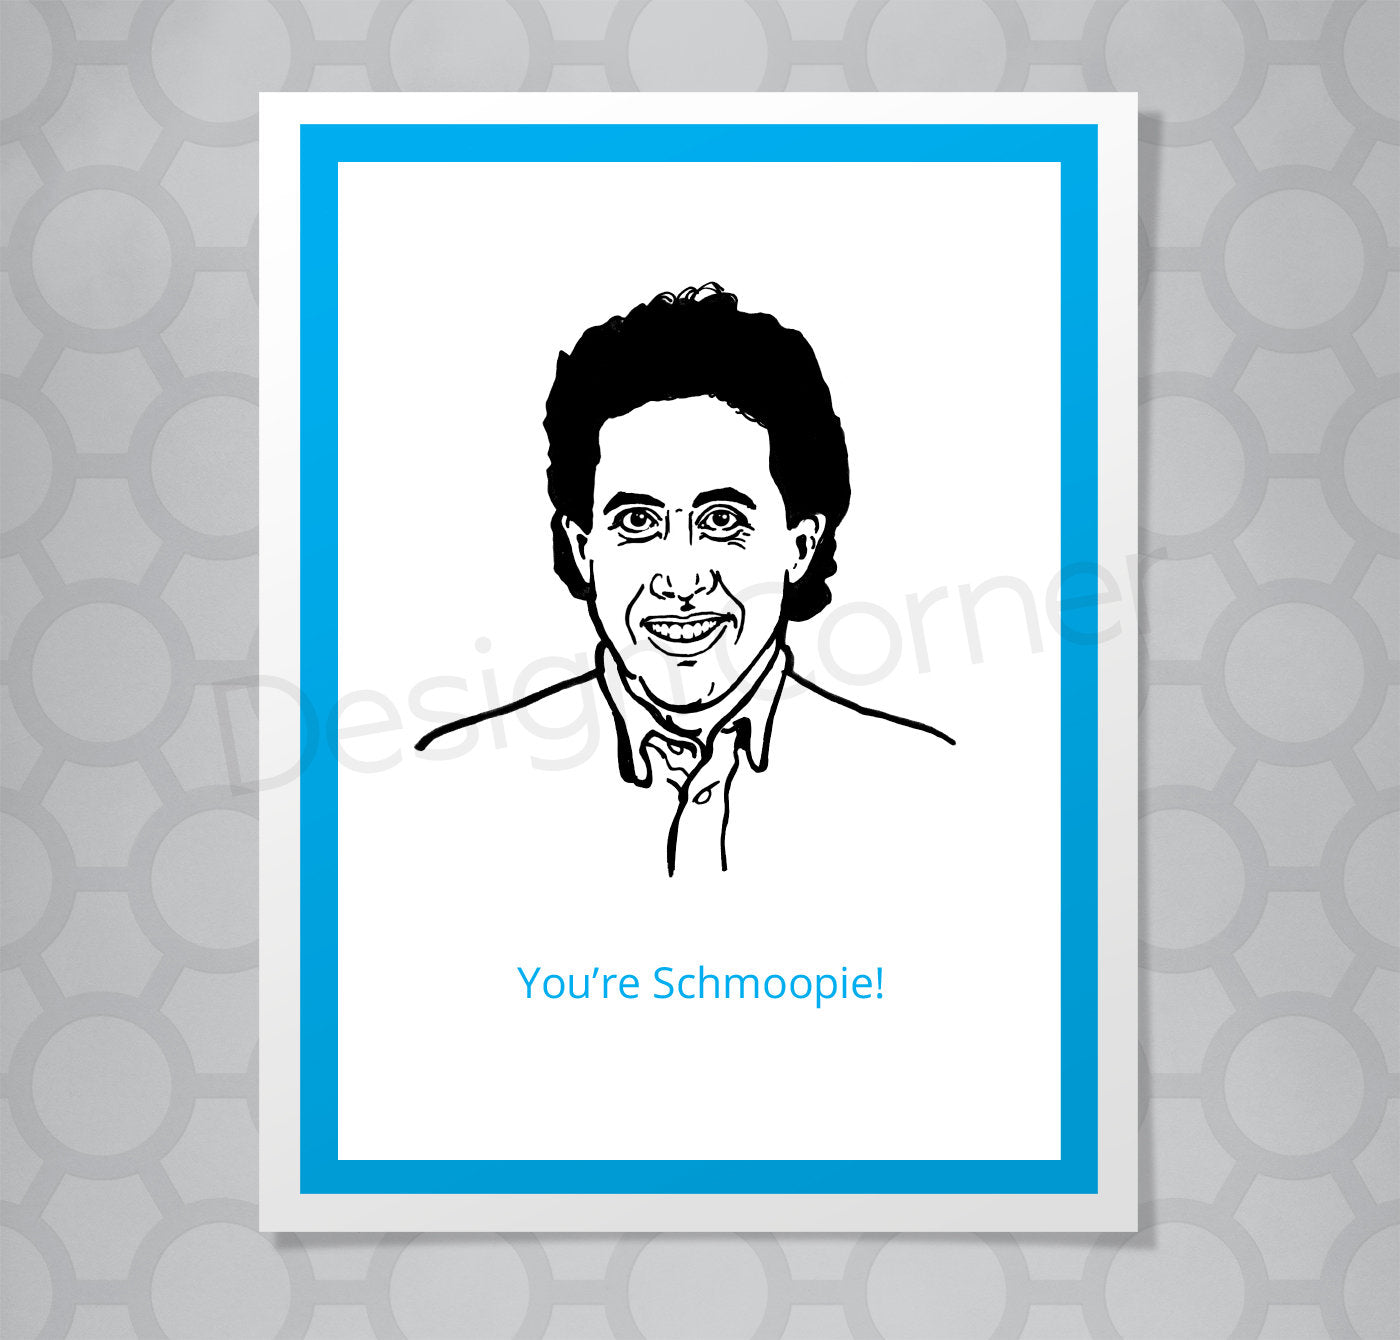 Illustration of Seinfeld's Jerry on a greeting card. Caption says "You're Schmoopie!"